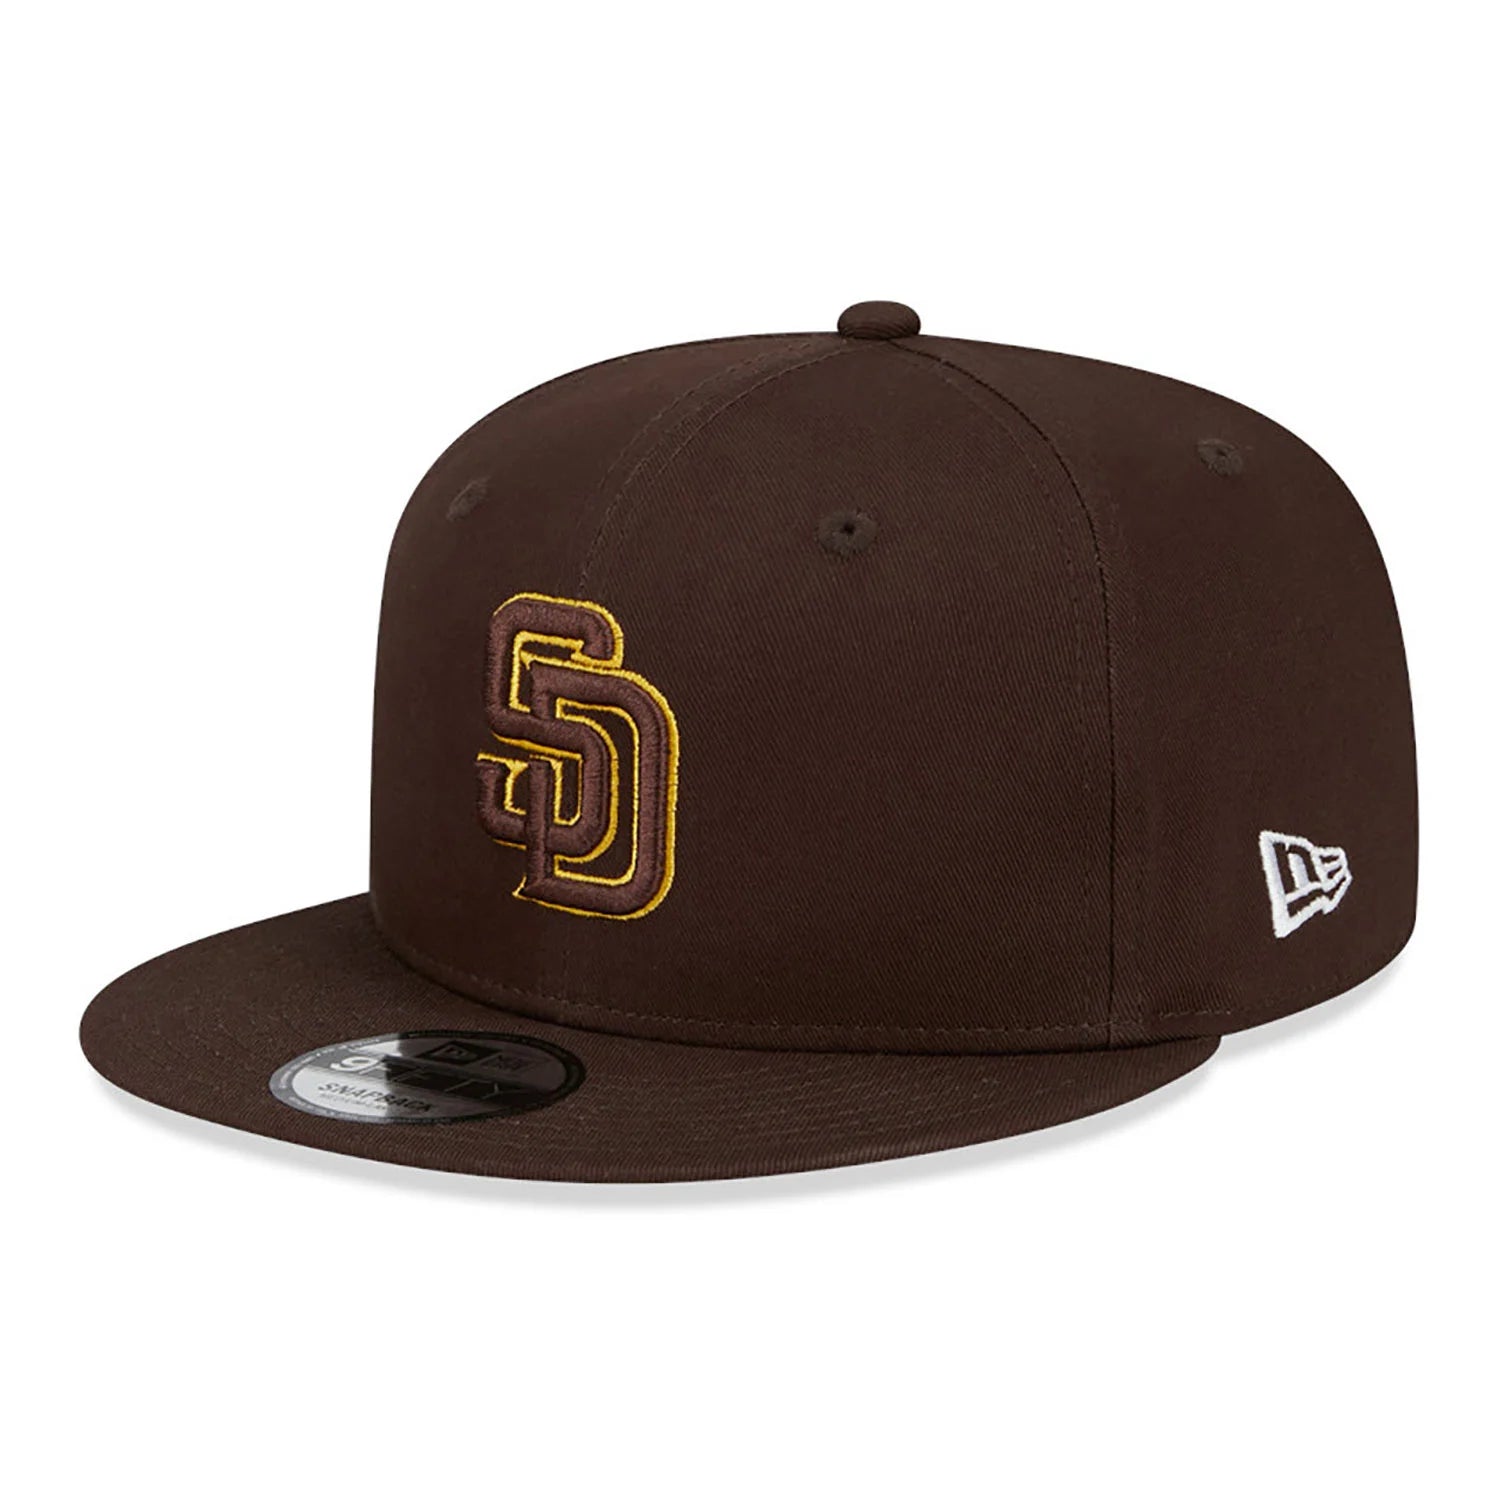 NEW ERA 9FIFTY SIDE PATCH SAN DIEGO PADRES 50TH ANNIVERSARY BROWN